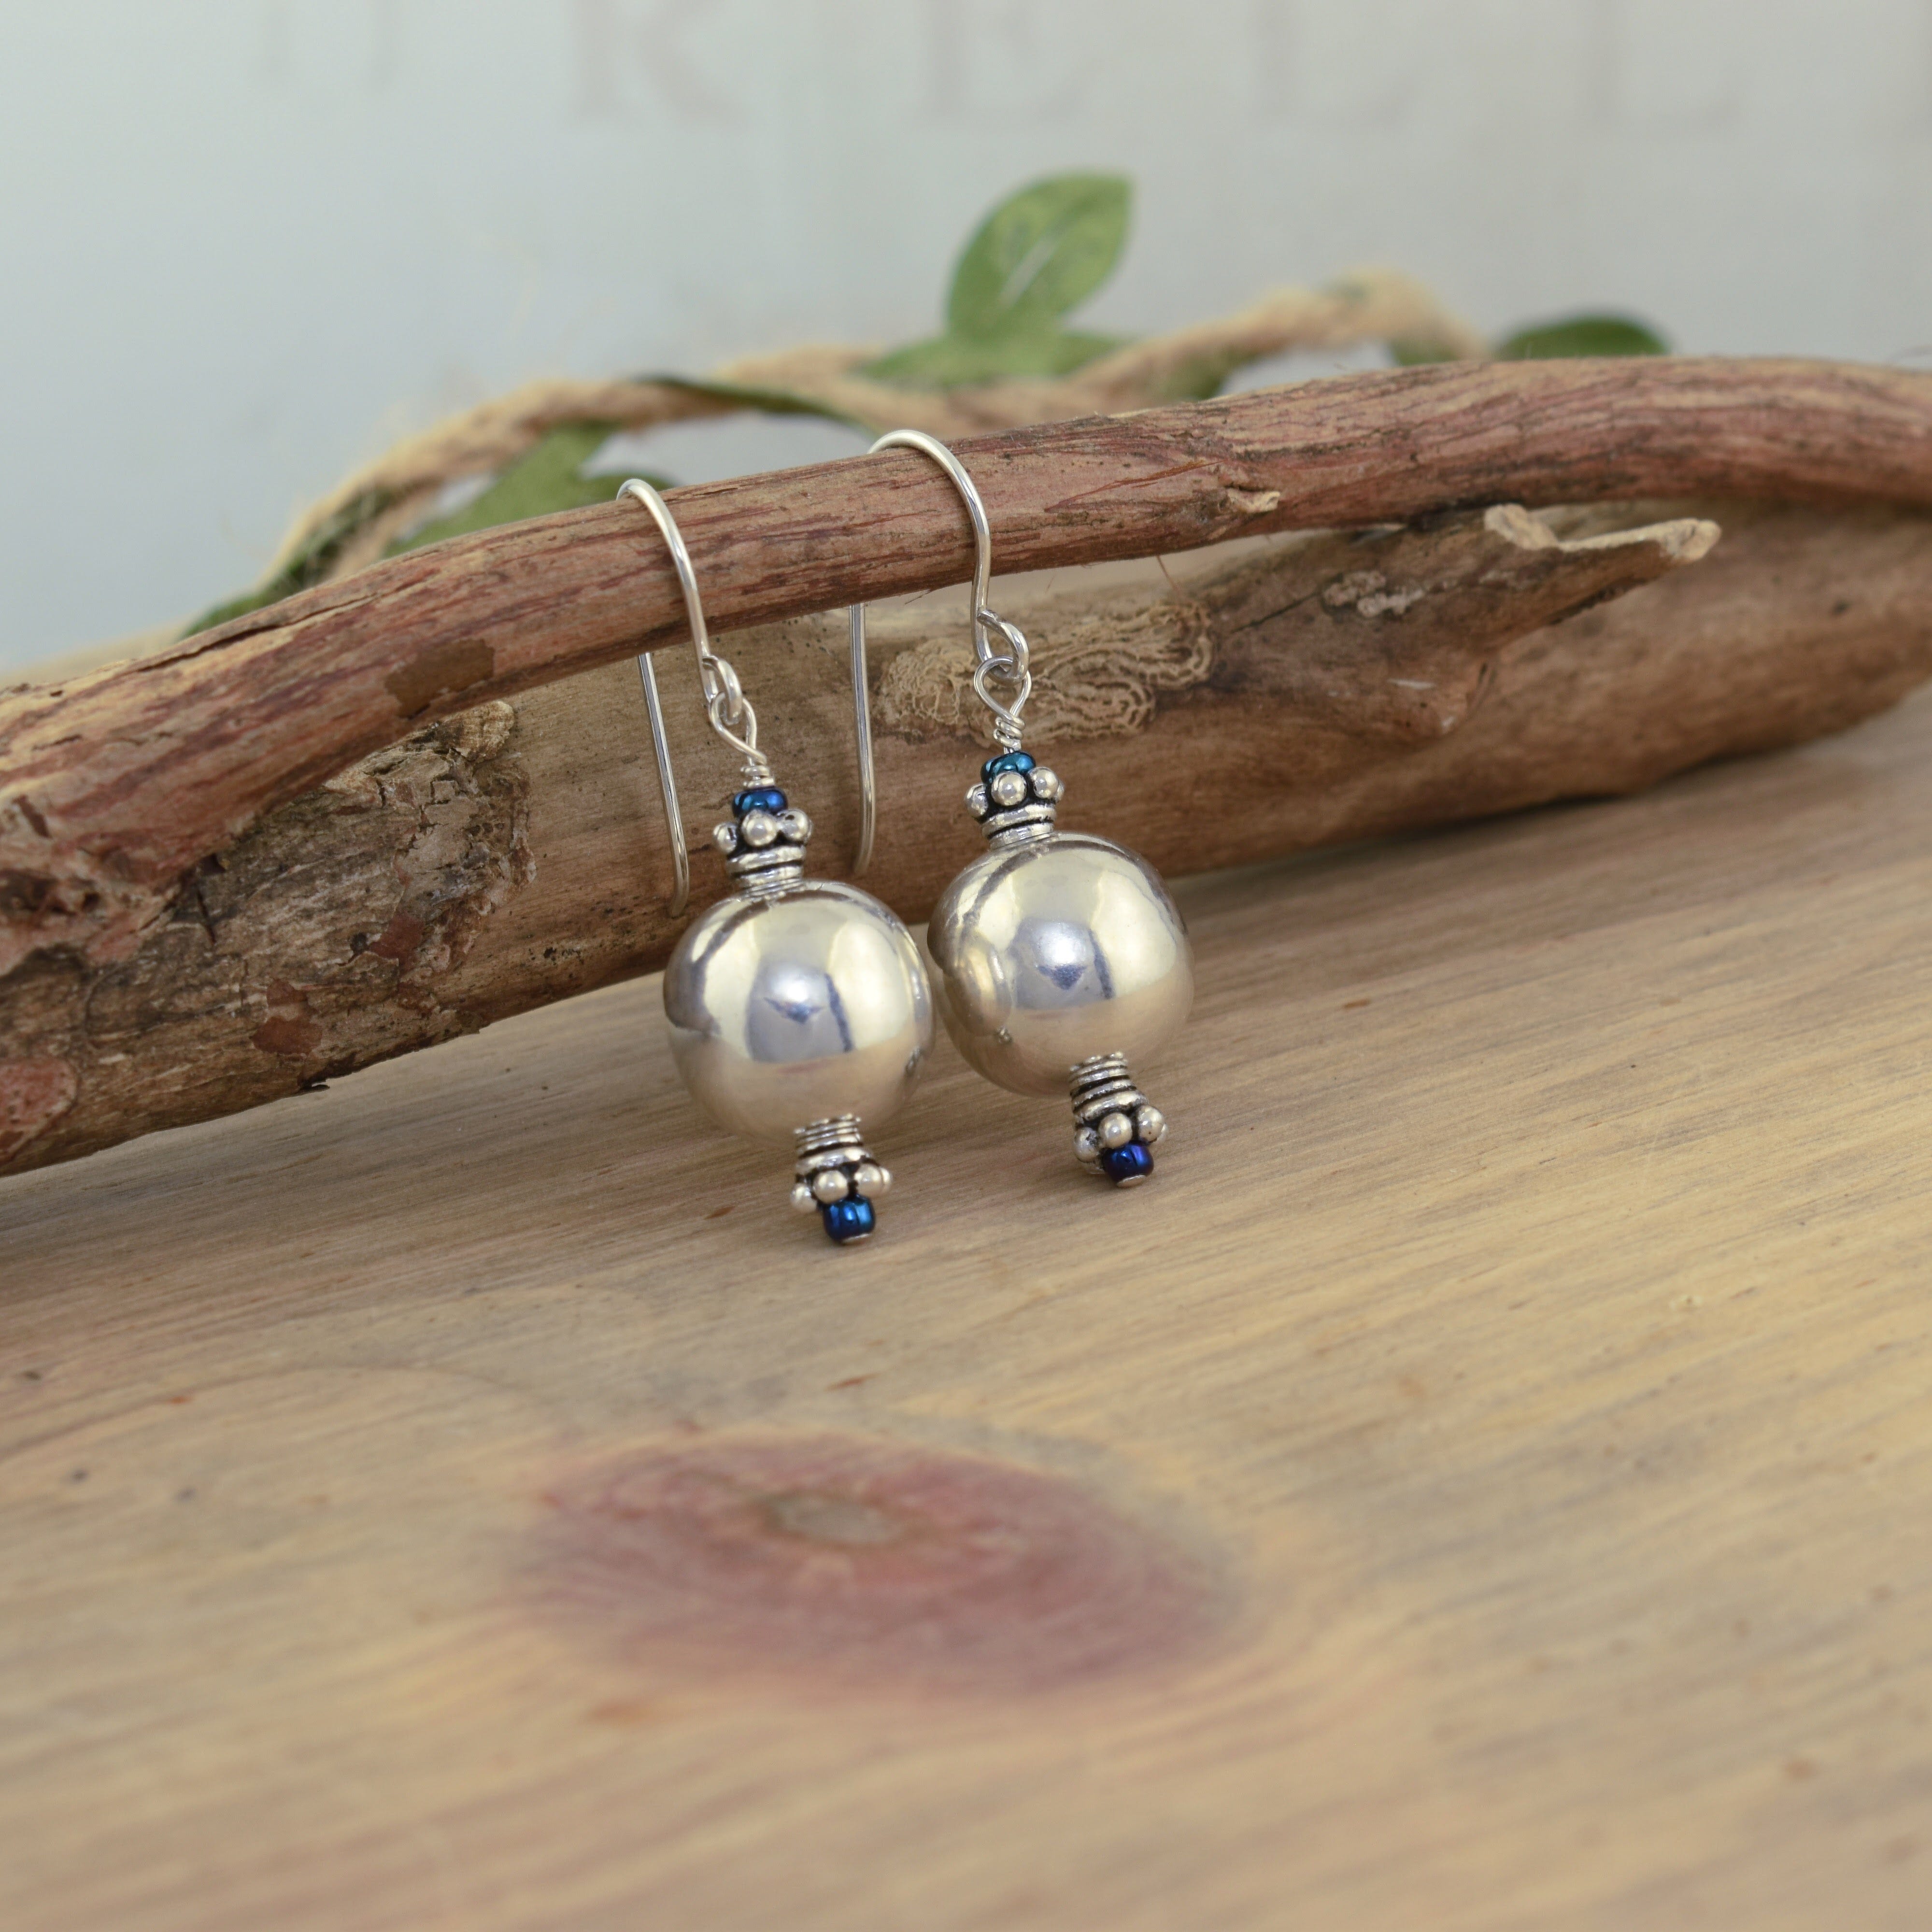 .925 sterling silver ball shaped earrings with bogo glass accents